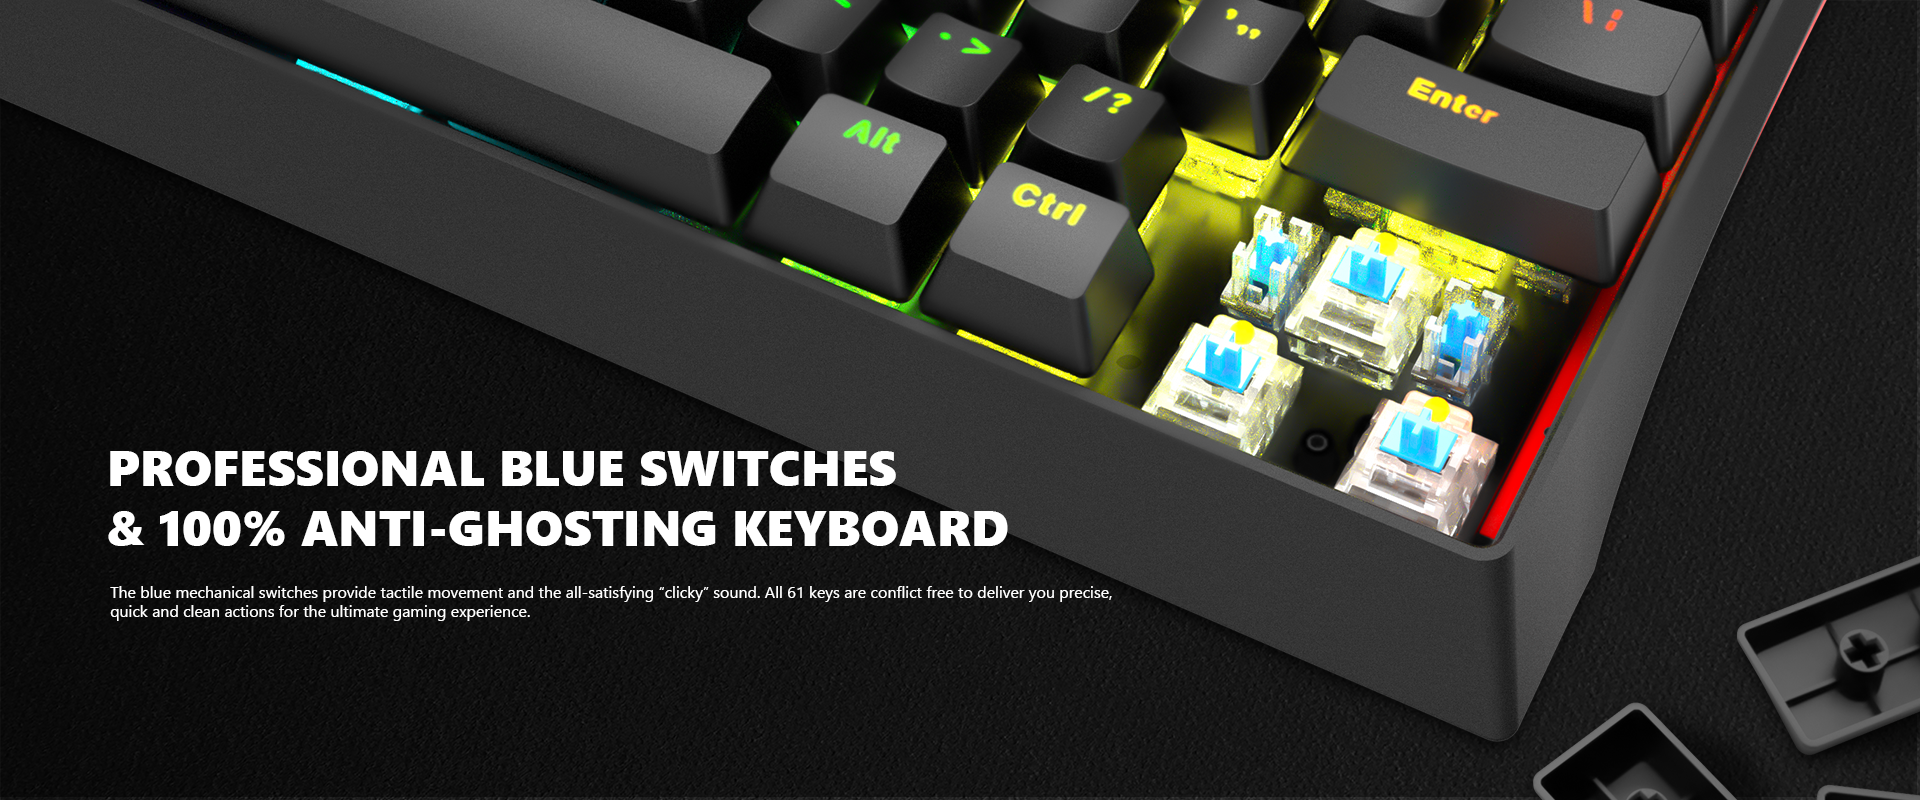 KG962_61_Keys_Mechanical_Gaming_Keyboard_with_Detachable_USB_Type-C_Cable_PC_2.png